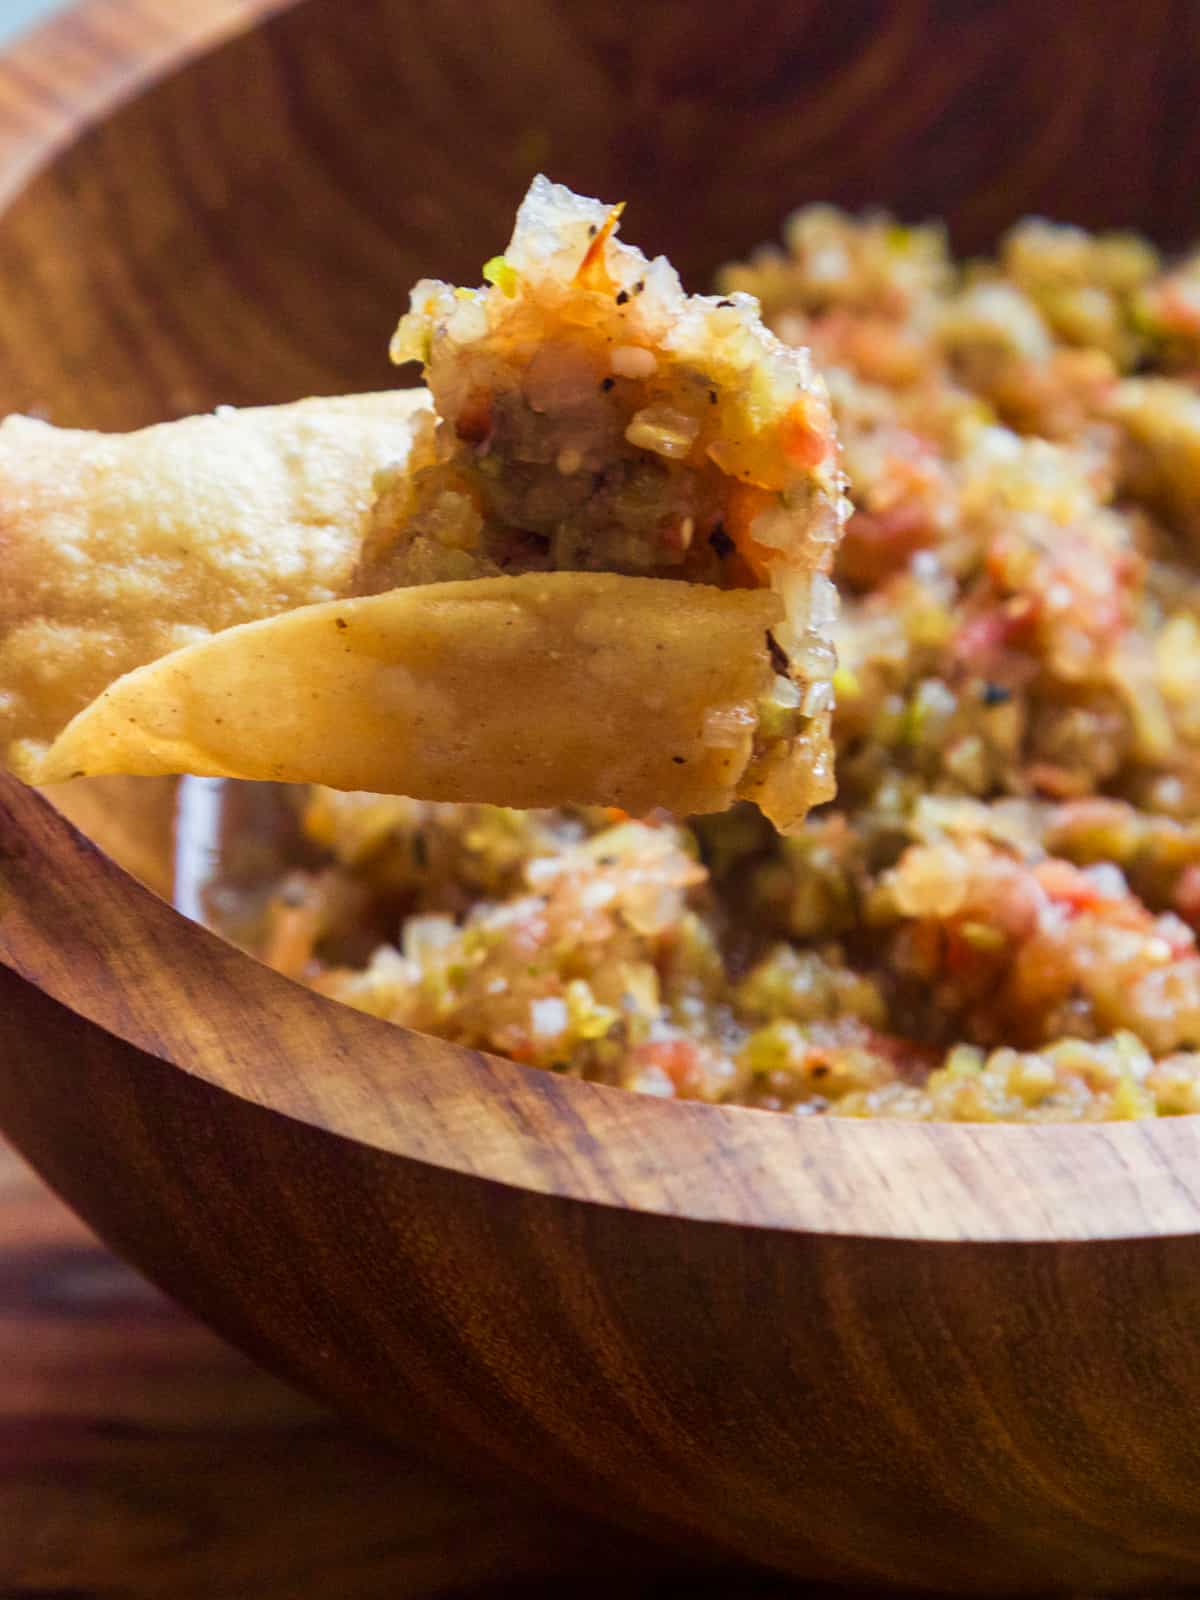 A wooden bowl with a curved tortilla scoop of homemade tomatillo salsa on it ready to take a bite.